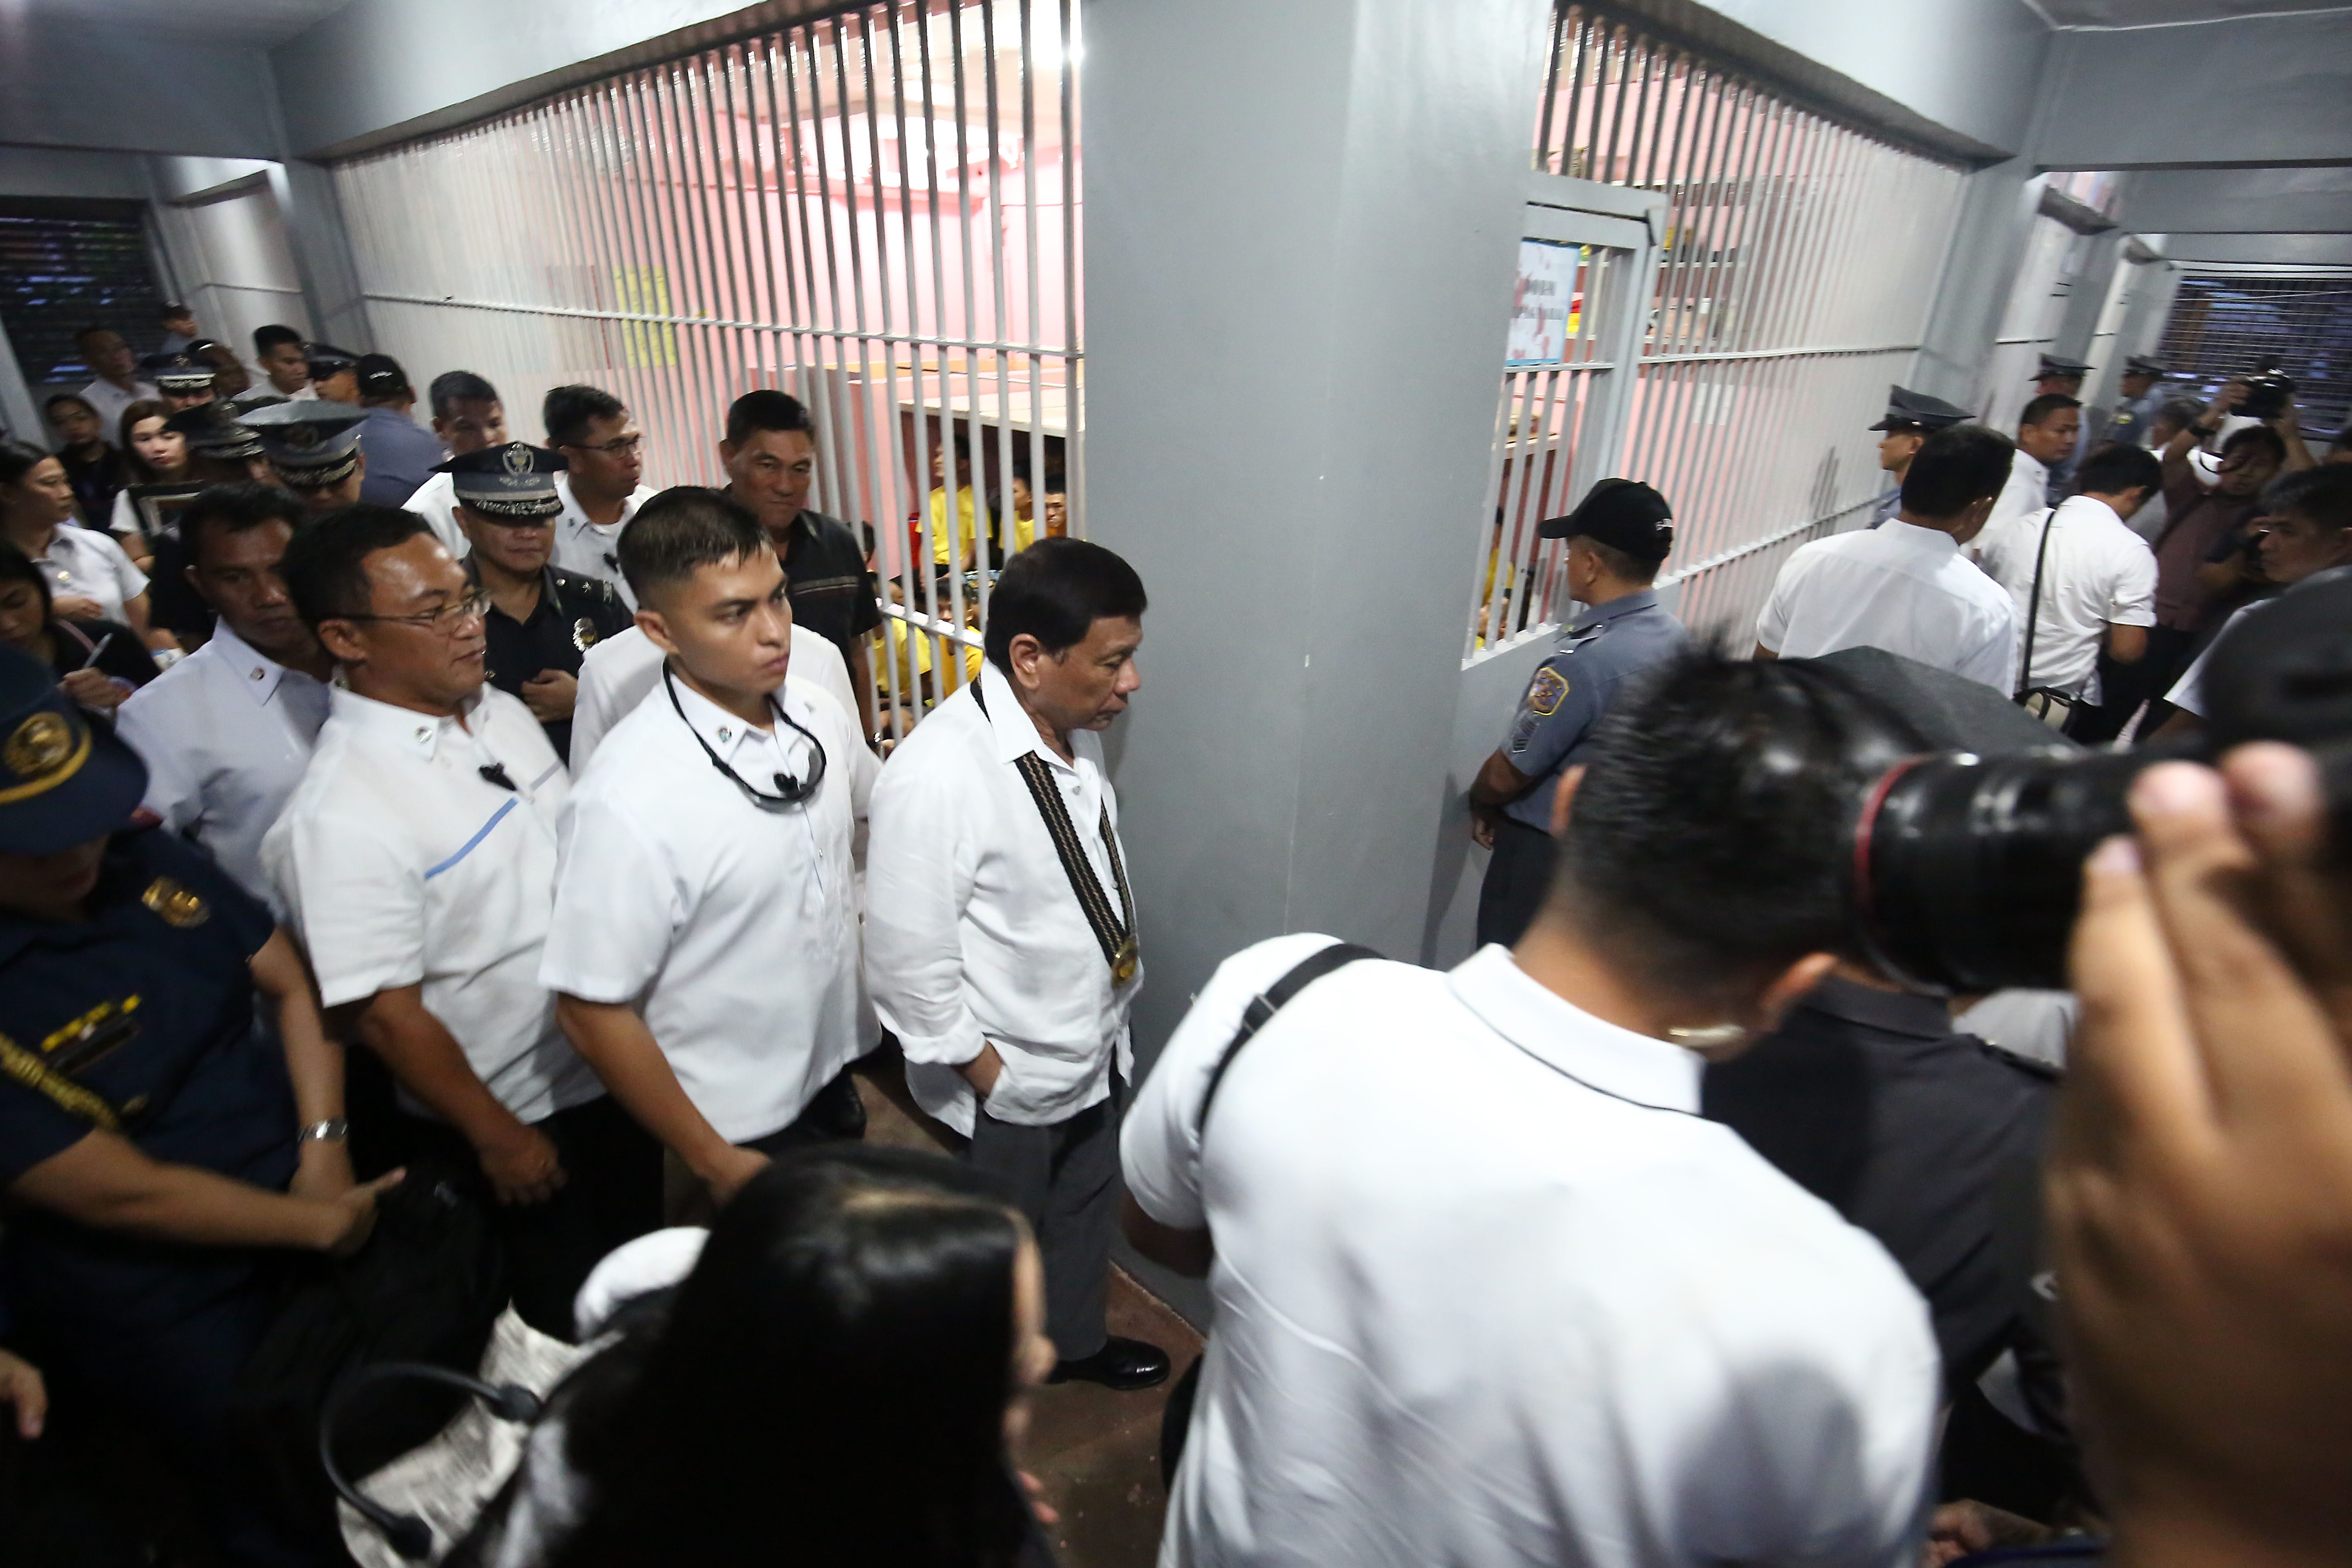 INSPECTING JAILS. President Rodrigo Duterte is given a tour inside the detention facility of the BJMP at the Camp Bagong Diwa in Taguig City on October 18, 2017. Photo by Ben Nabong/Rappler 